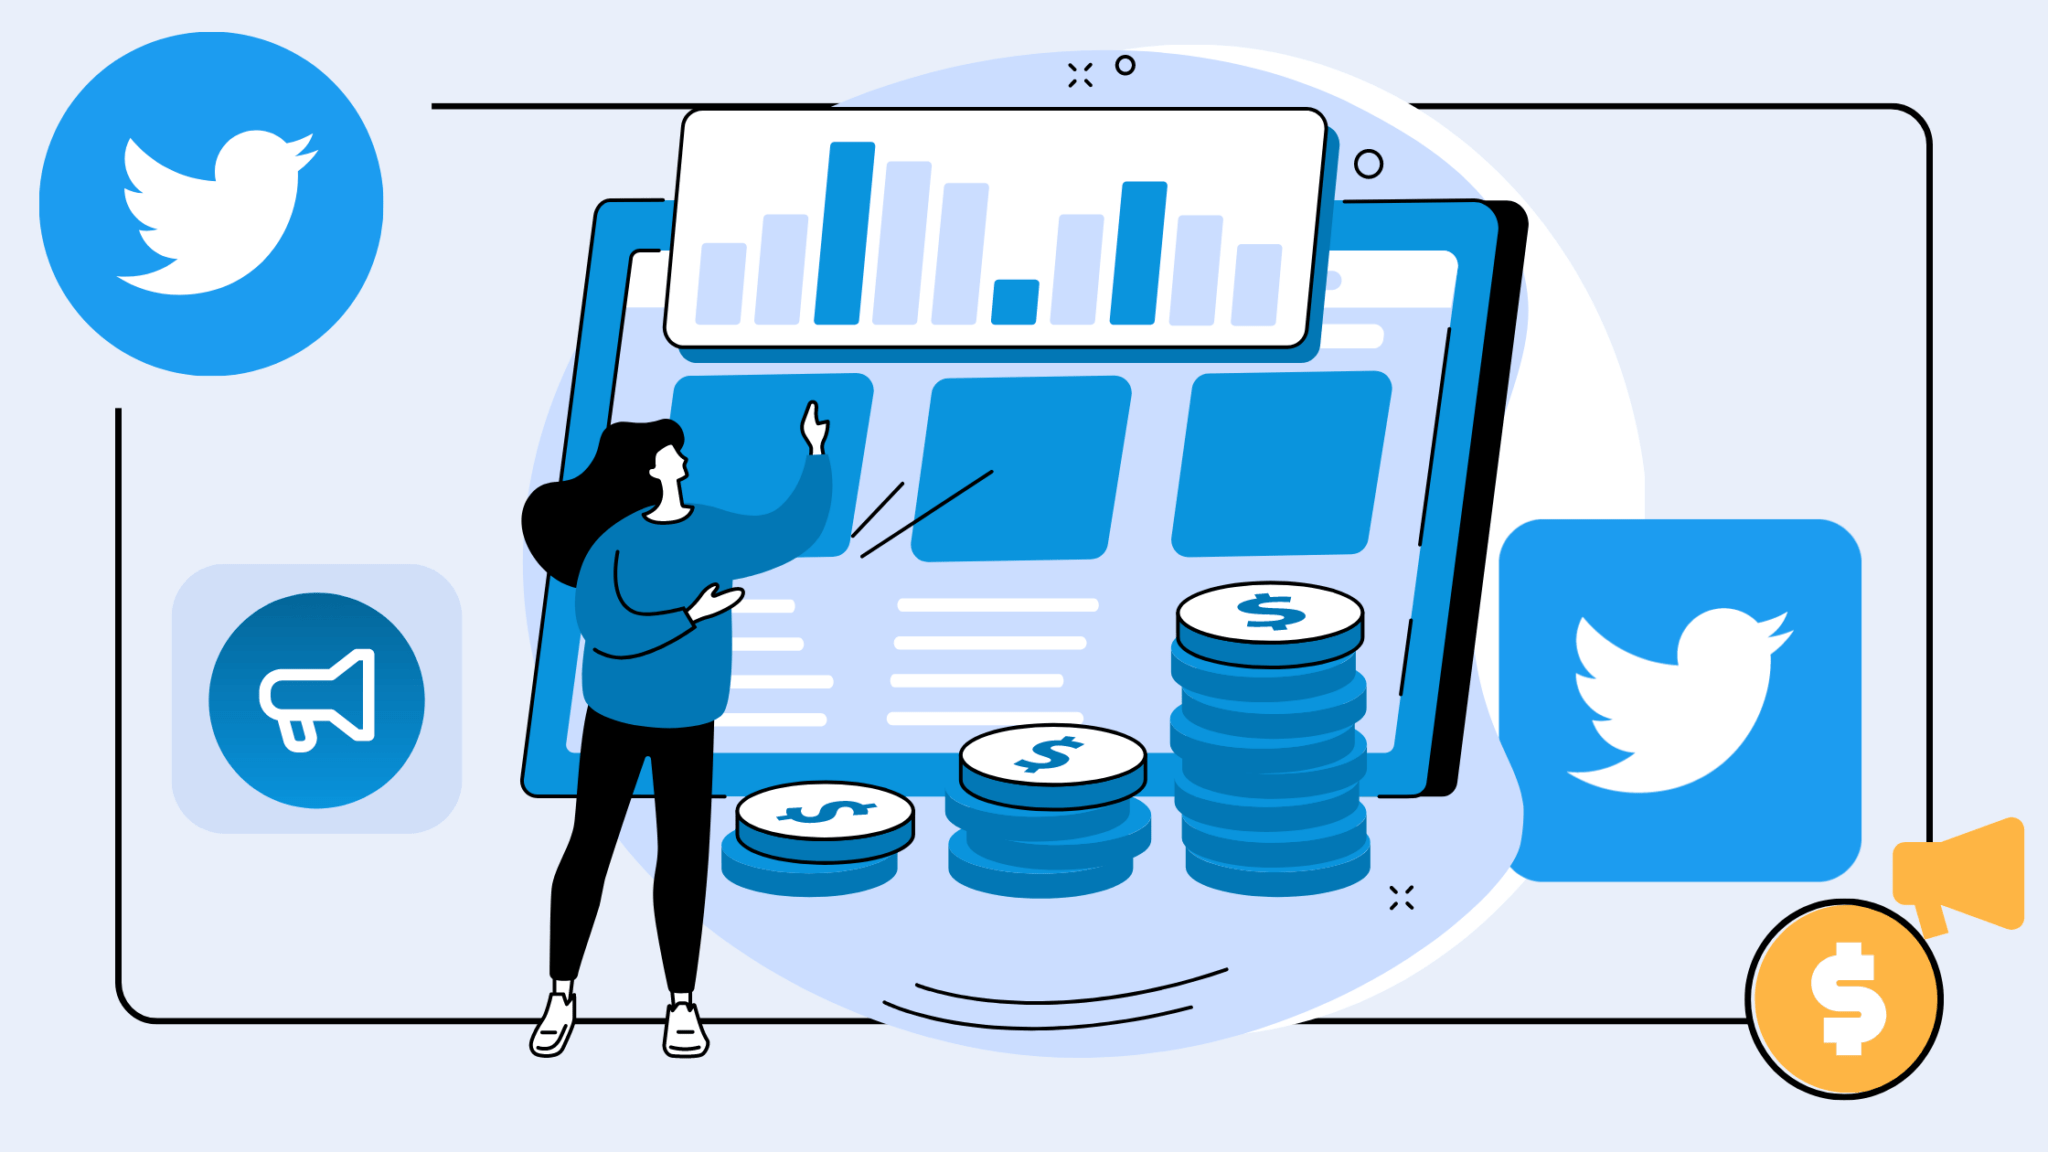 How To Promote Your App/ SaaS Through Twitter?